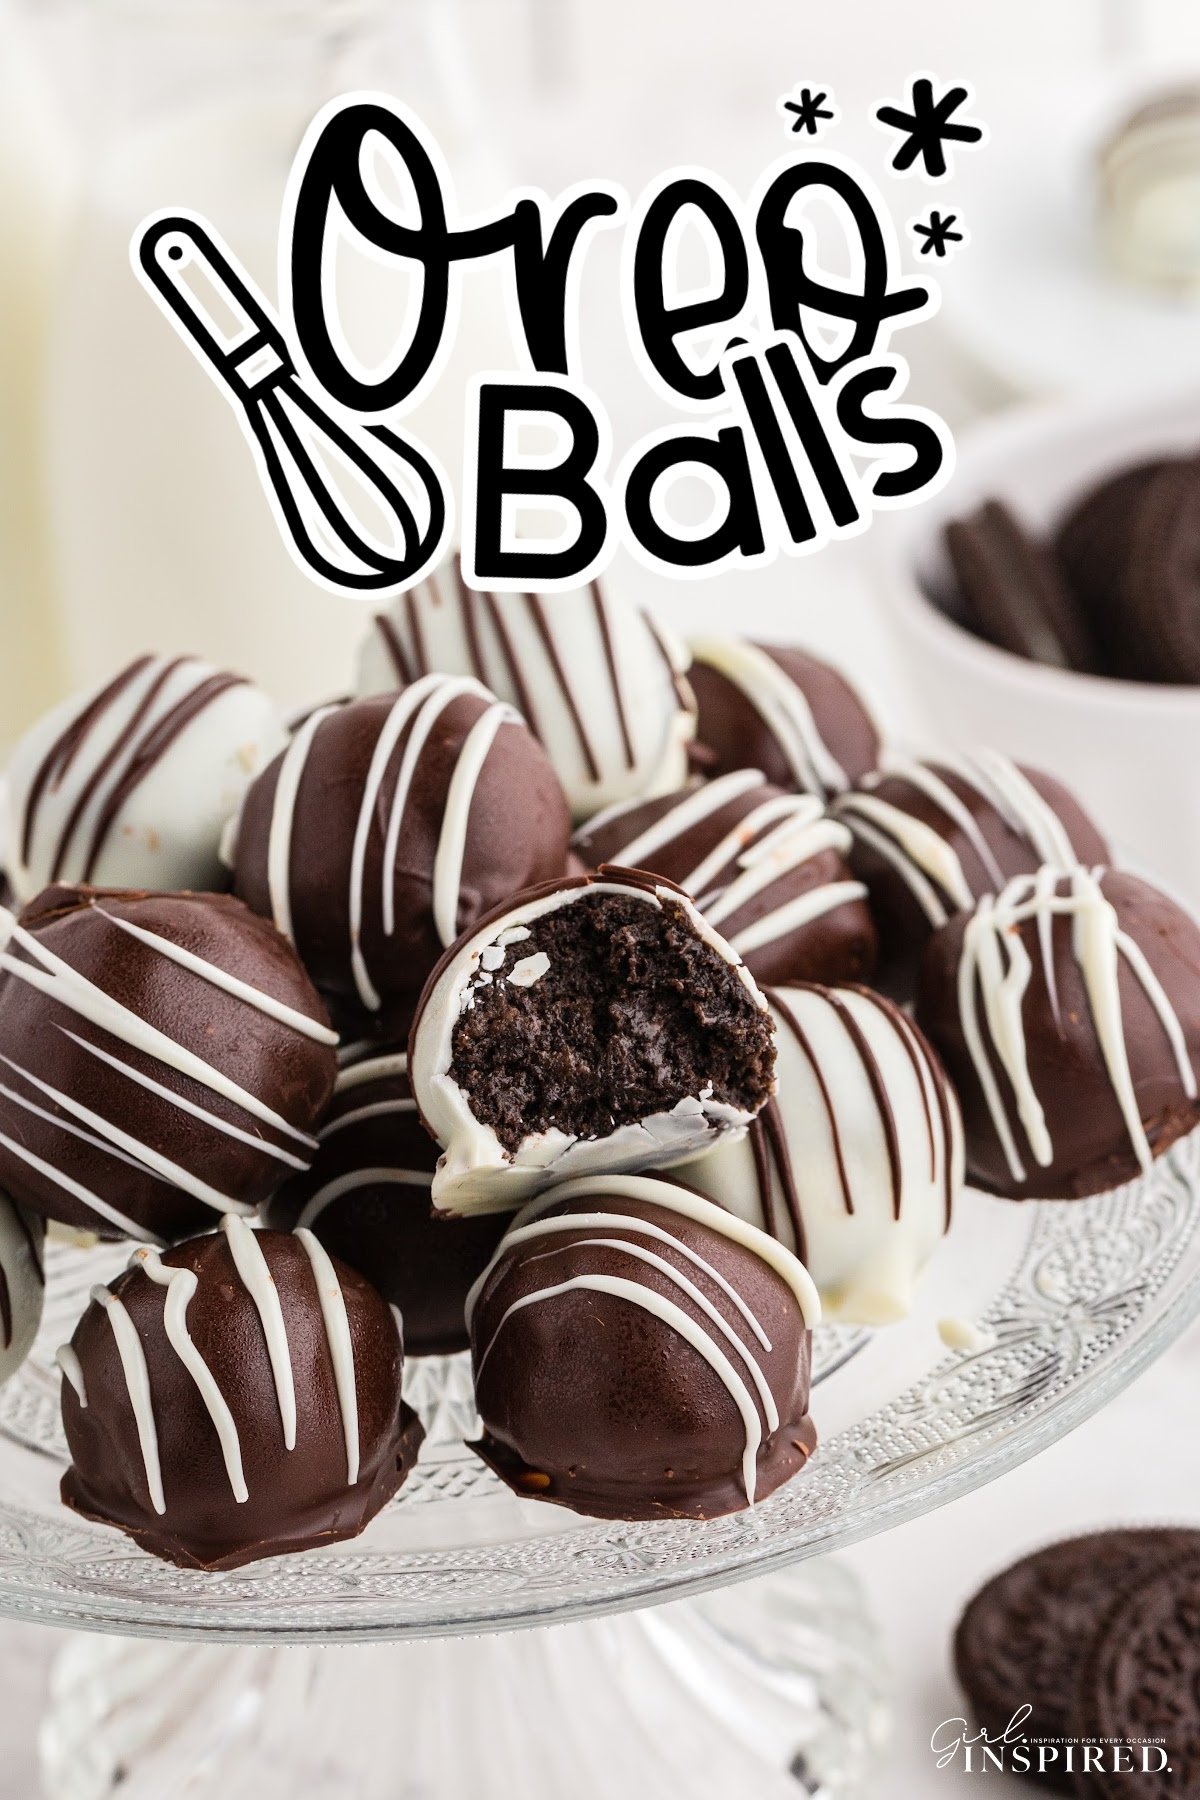 Oreo balls piled on top of each other on a glass cake stand, single Oreo ball broken in half.